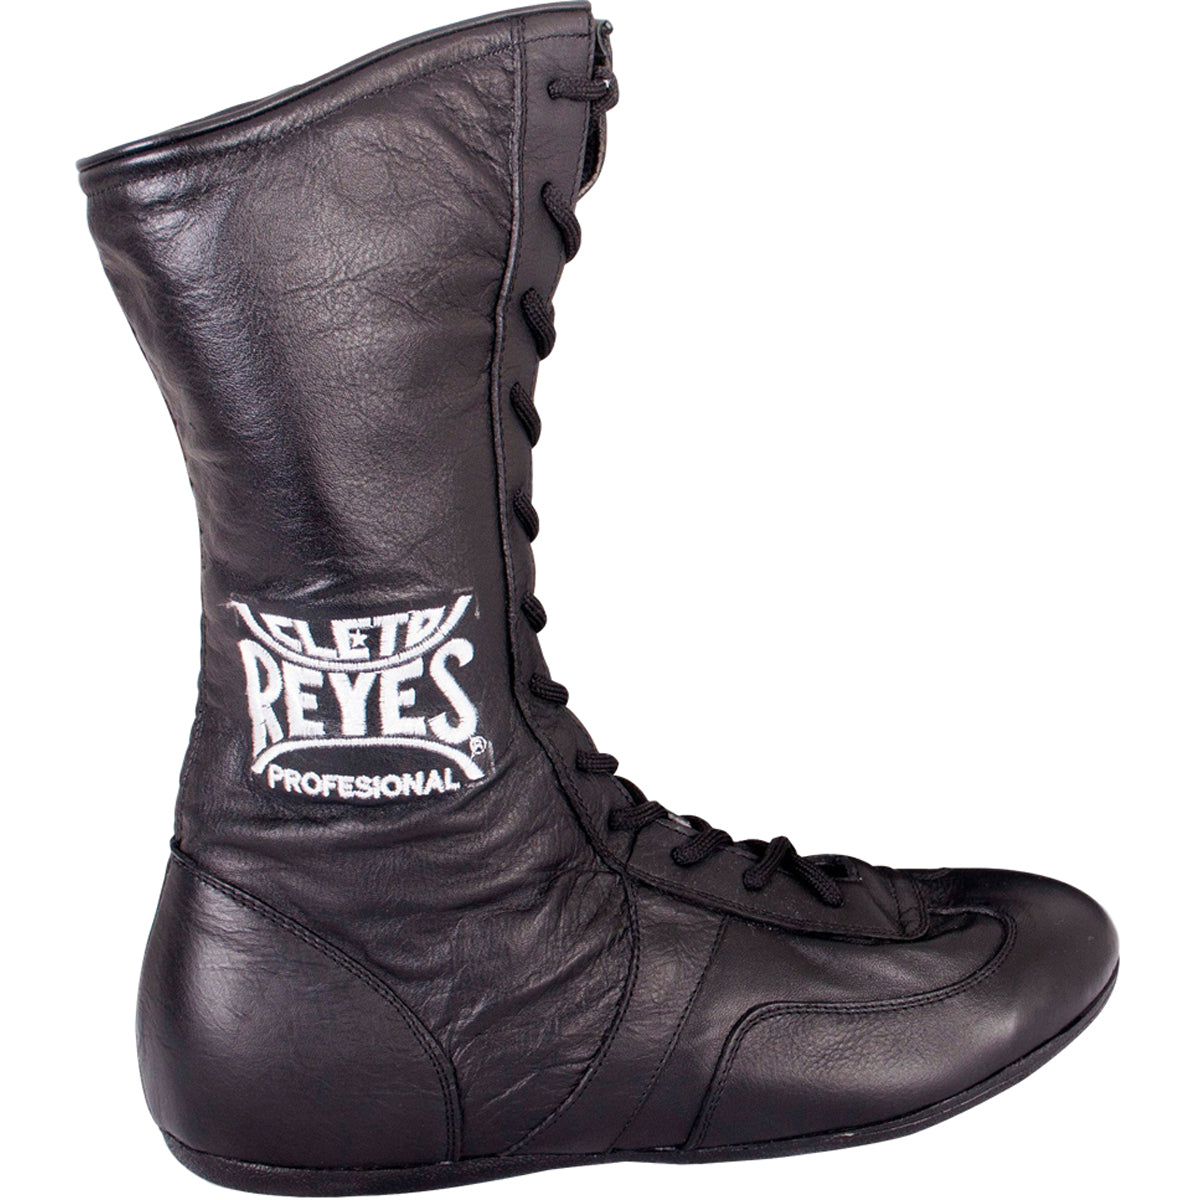 Cleto Reyes Leather Lace Up High Top Boxing Shoes - Size: 12 - Black Cleto Reyes